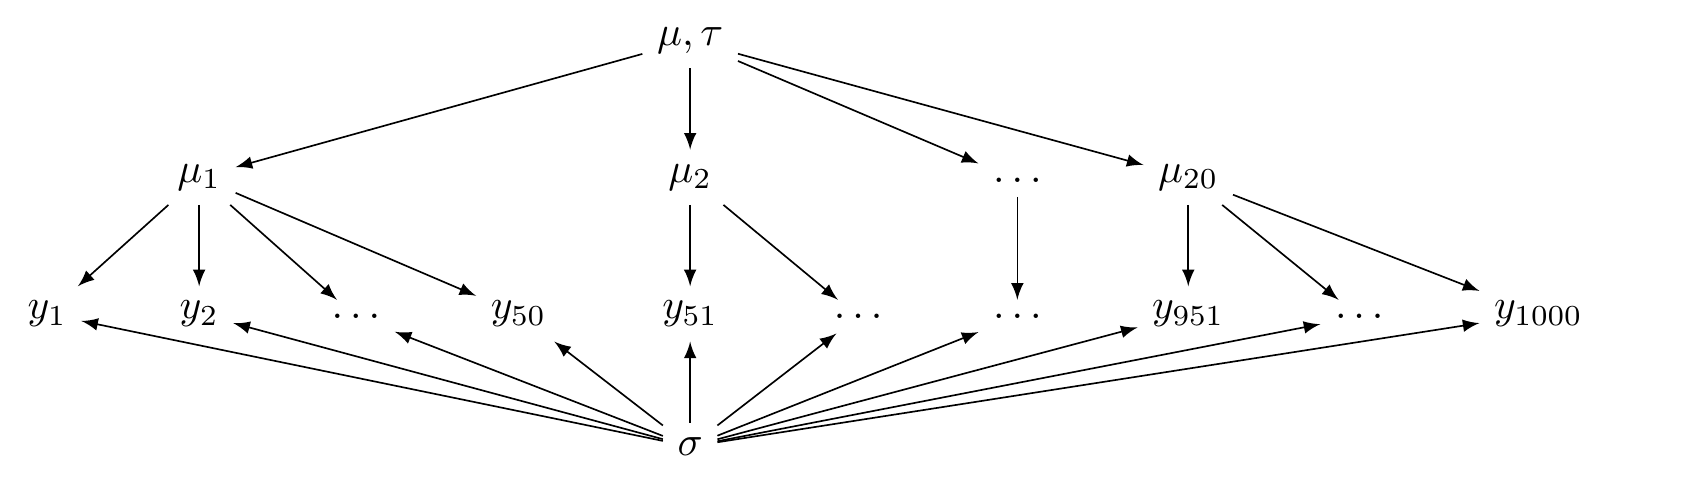 A directed acyclic graph illustrating a hierarchical model (partial pooling).